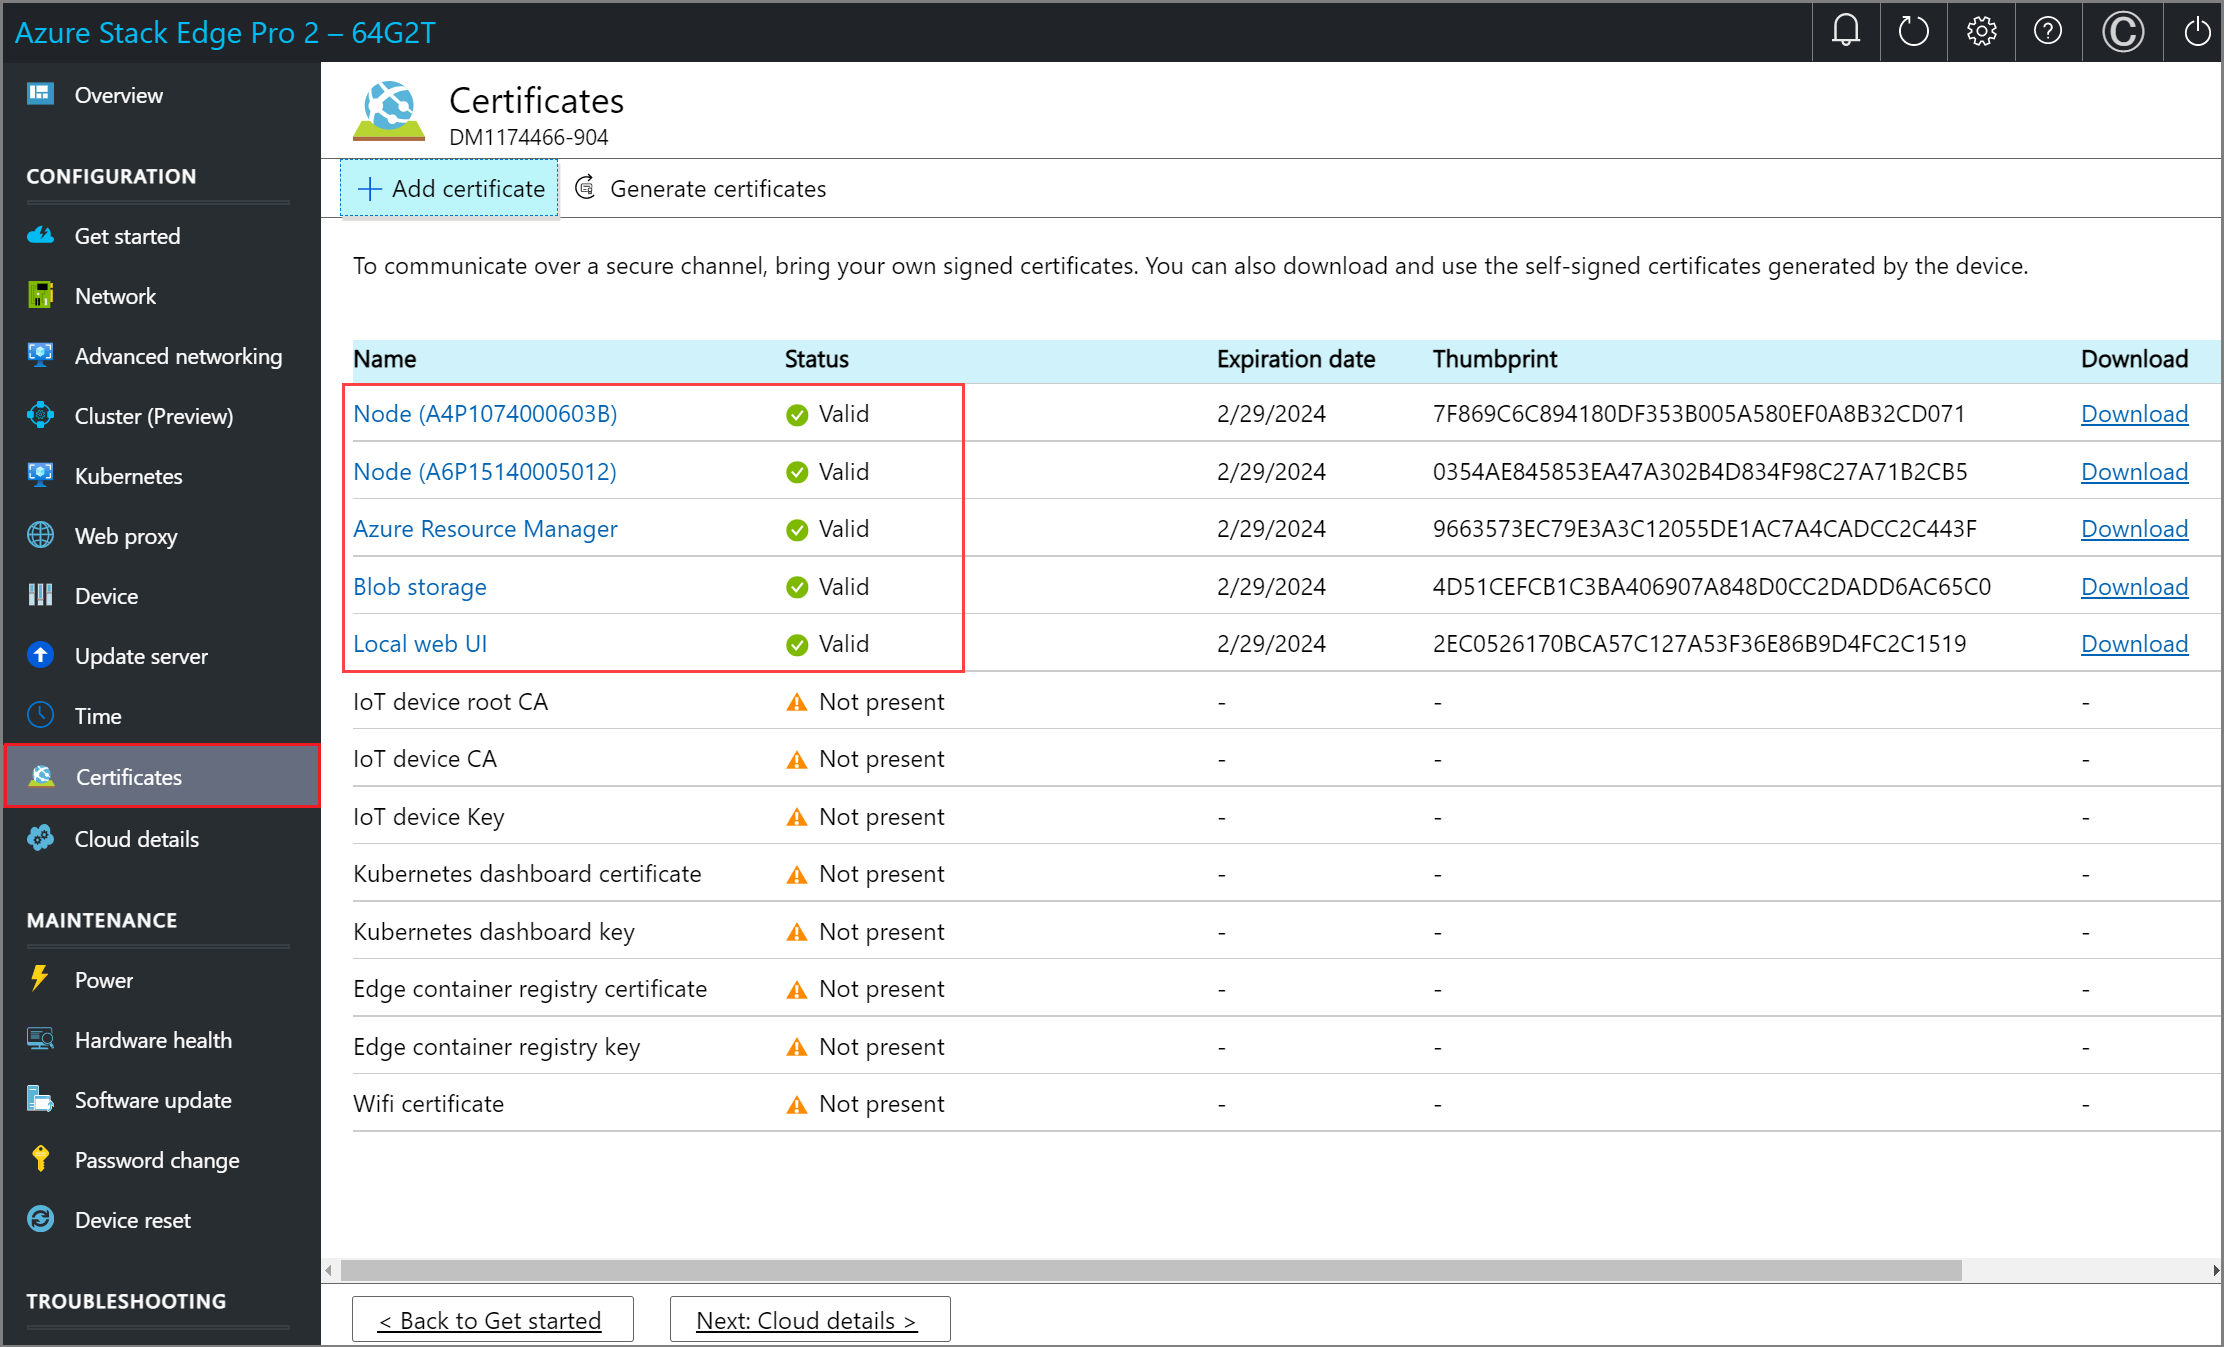 Screenshot of newly generated certificates on the Certificates page of an Azure Stack Edge device. Certificates with Valid state are highlighted.